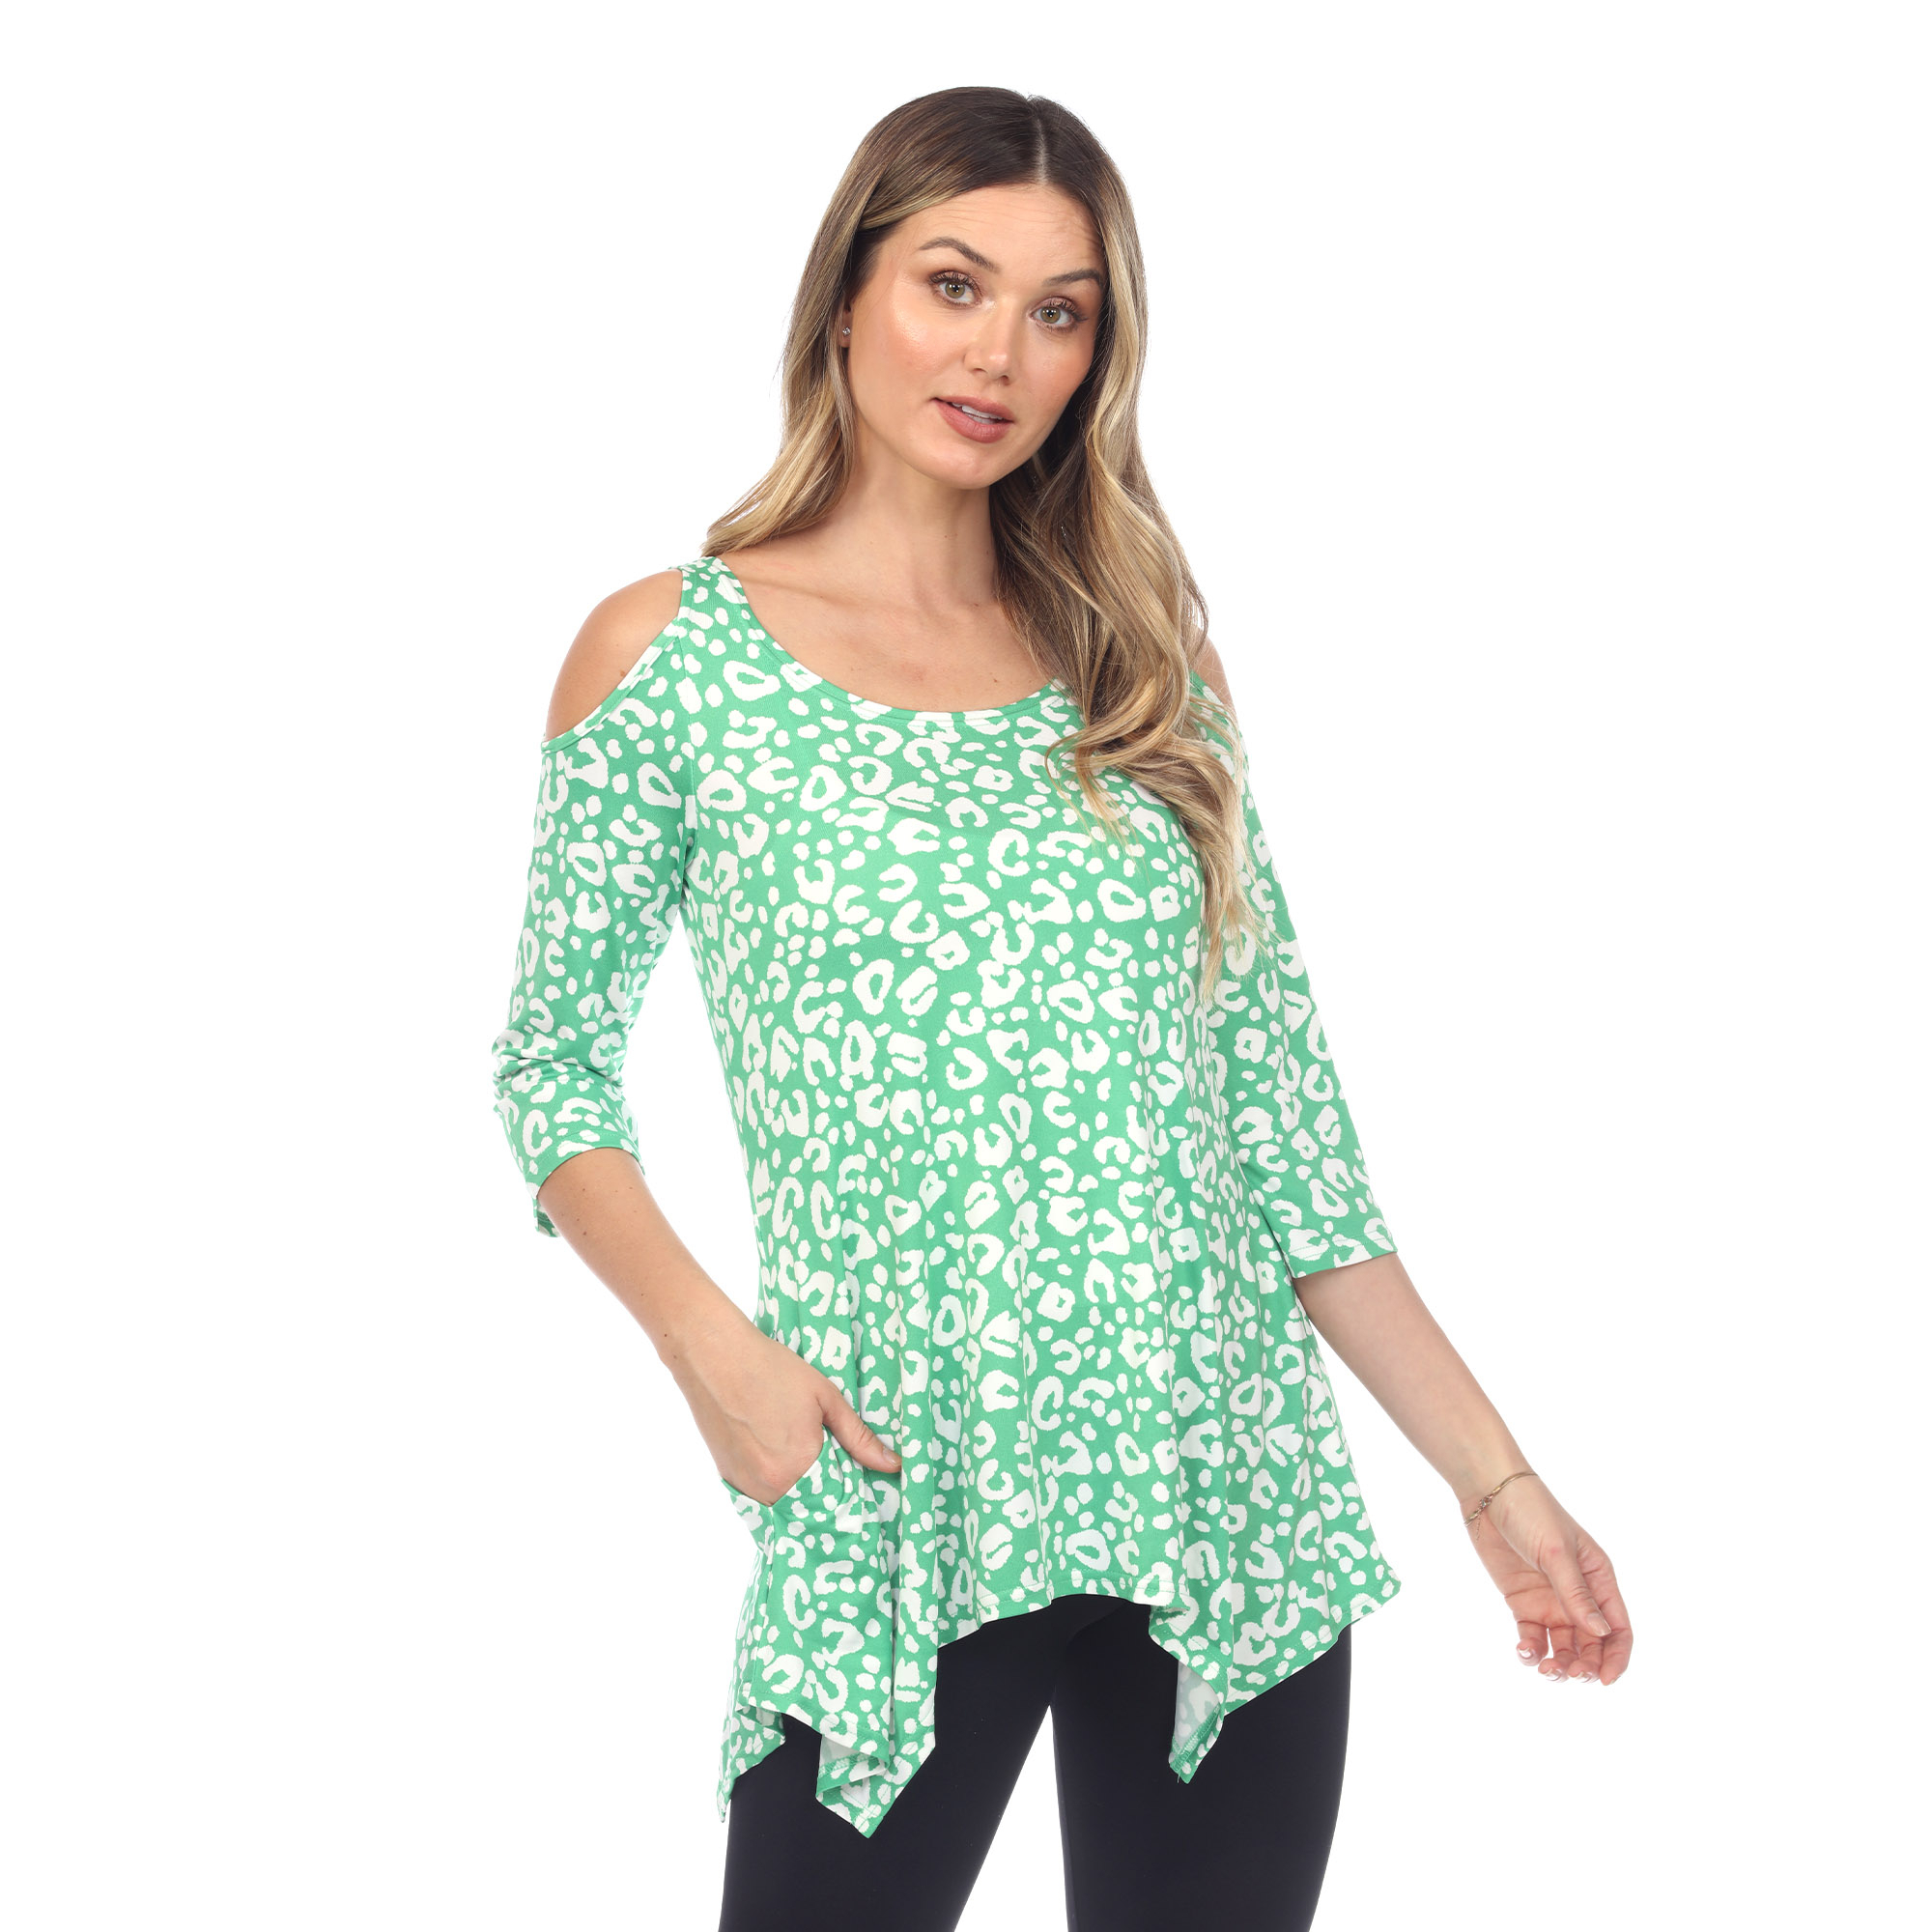 White Mark Women's Leopard Print Cold Shoulder Tunic Top With Pockets - Green, 1X